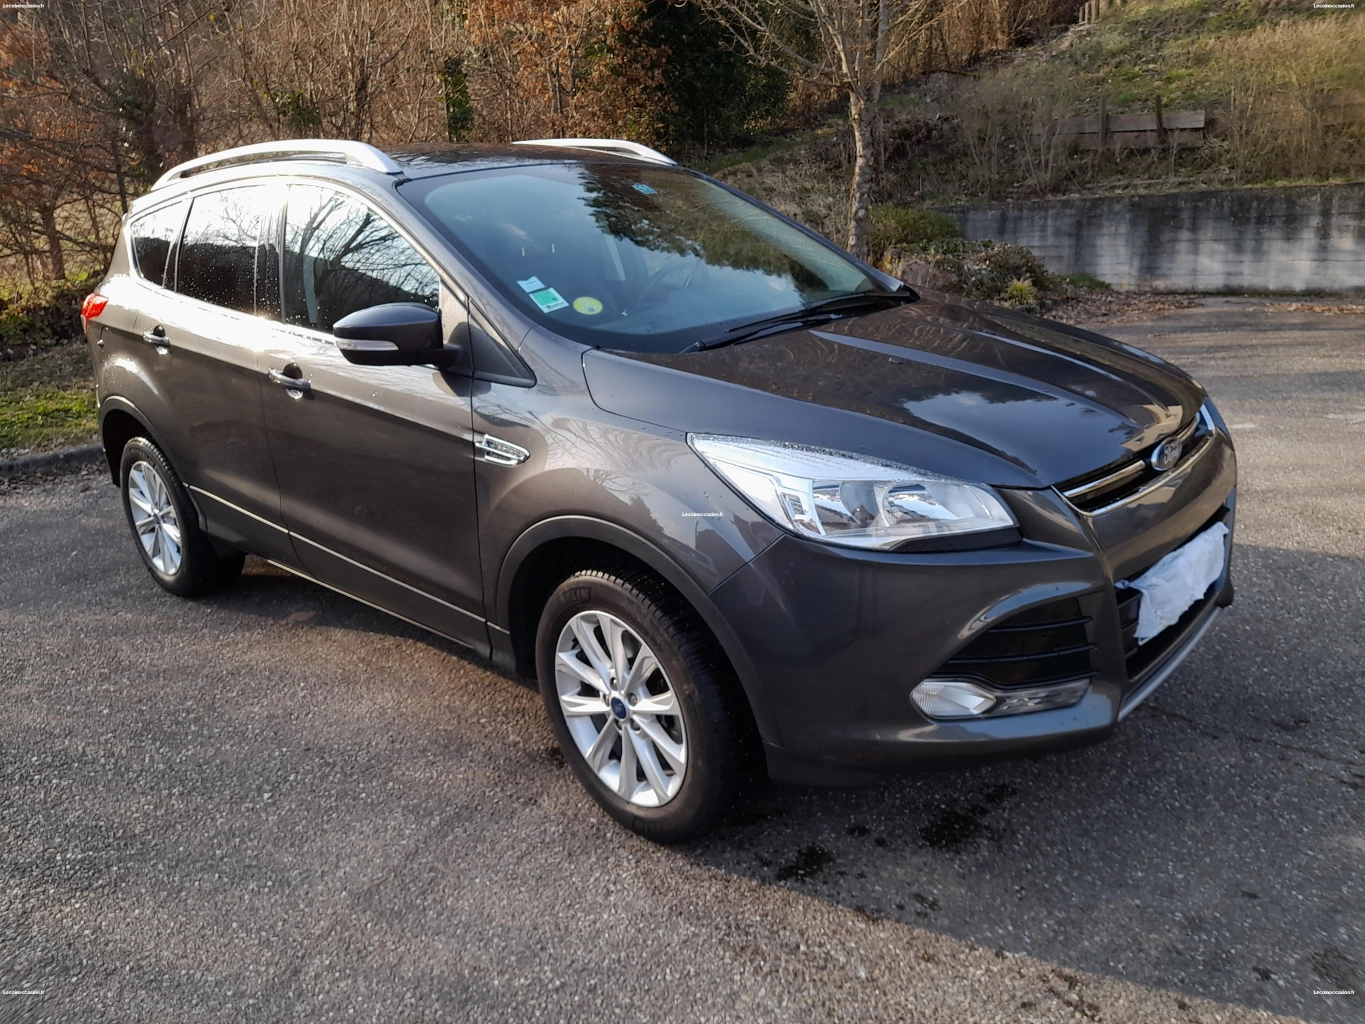 Vends Ford kuga 4x4